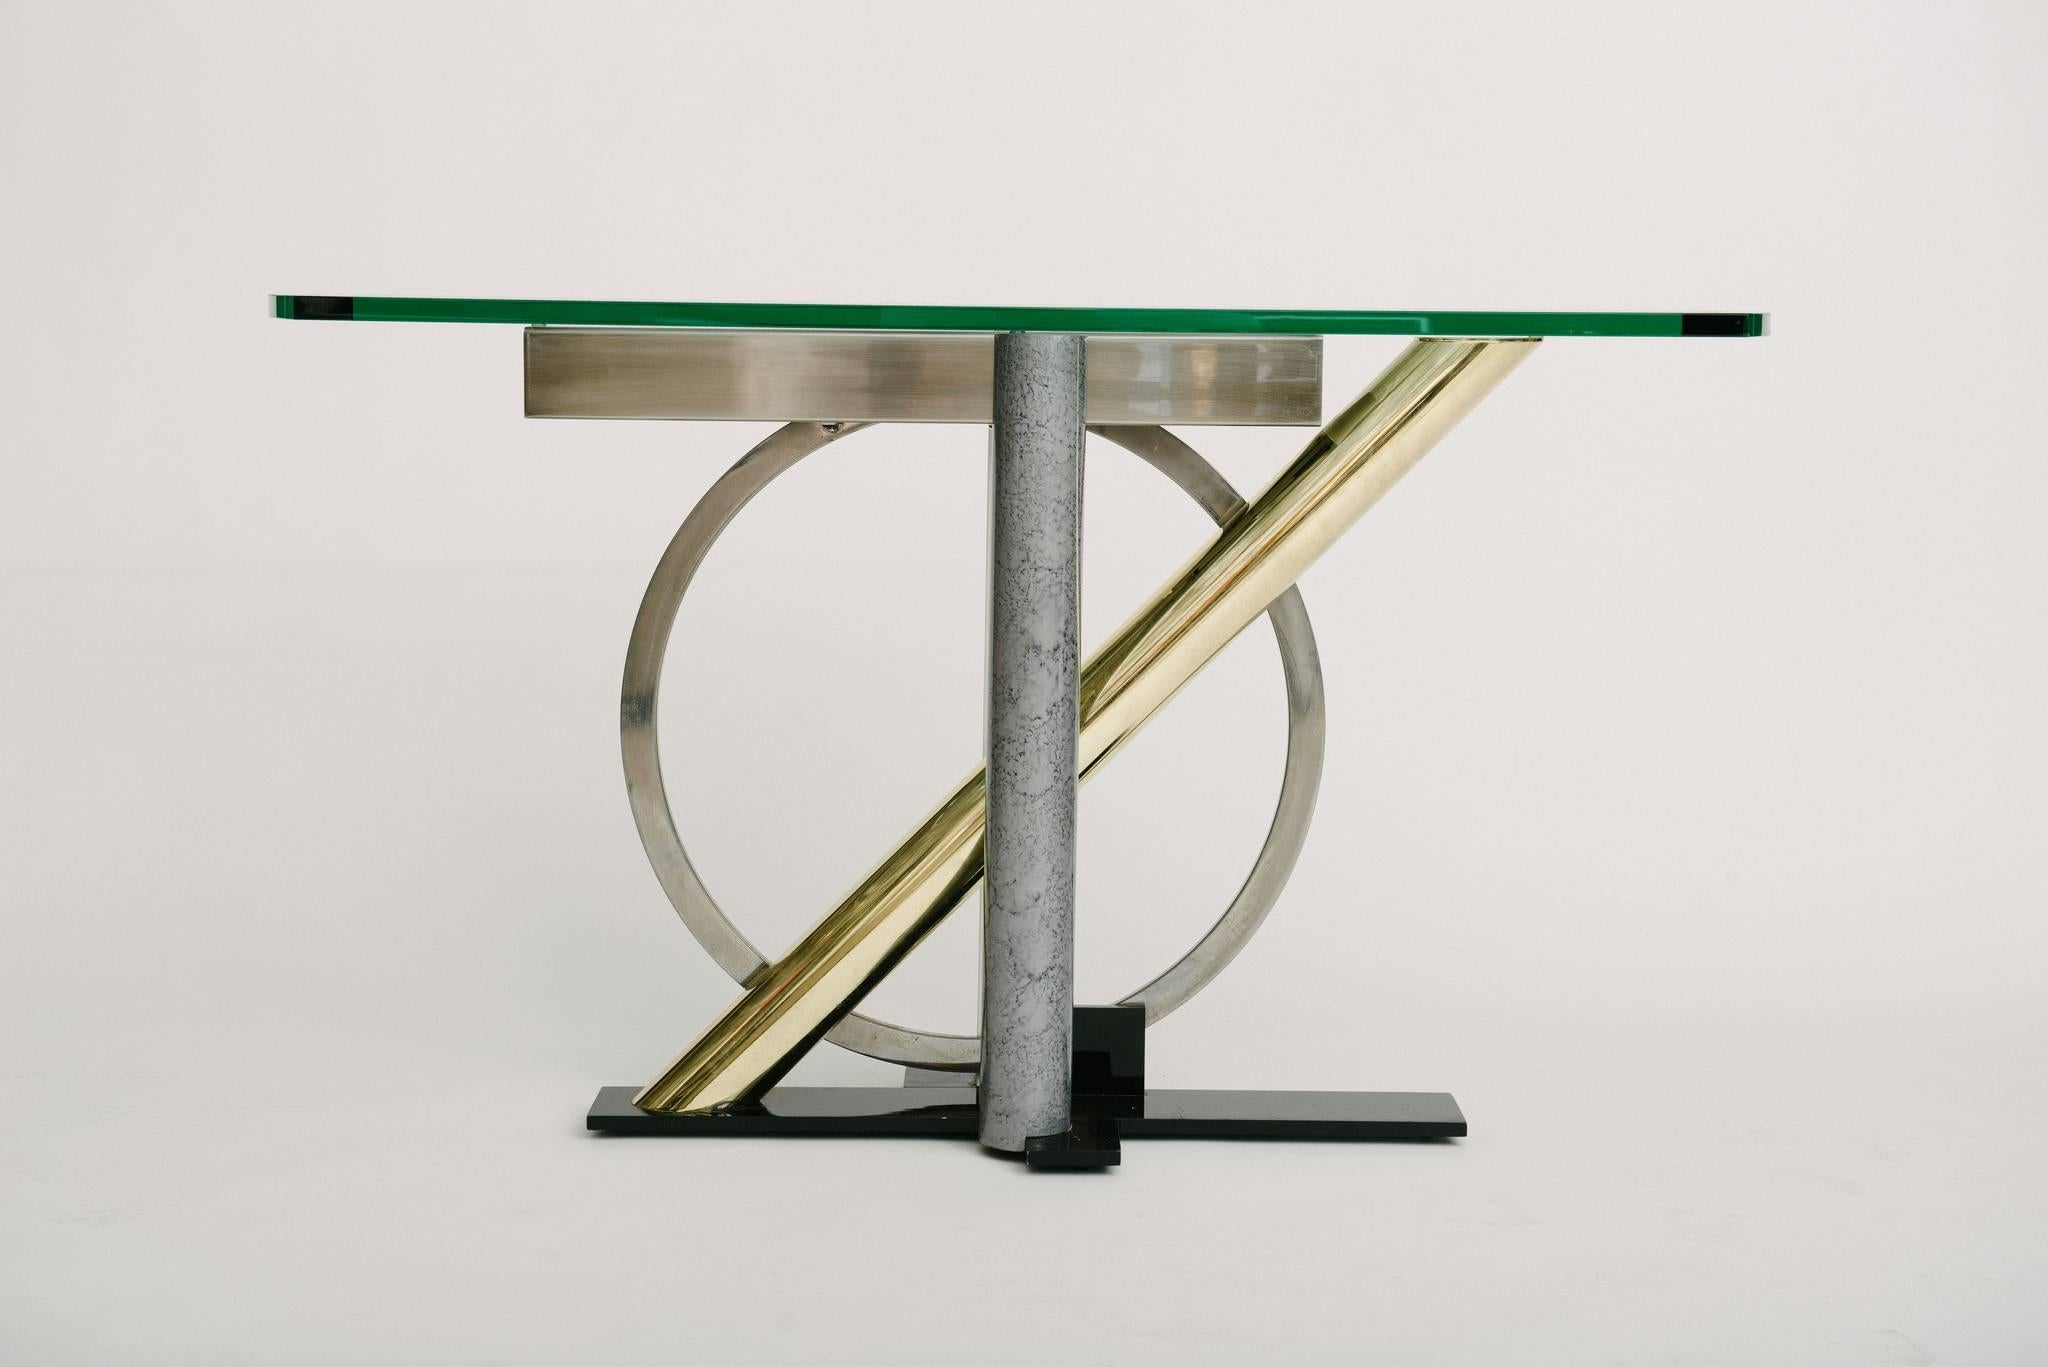 Vintage geometric mixed metal console table with glass top by Kaizo Oto for Design Institute America.